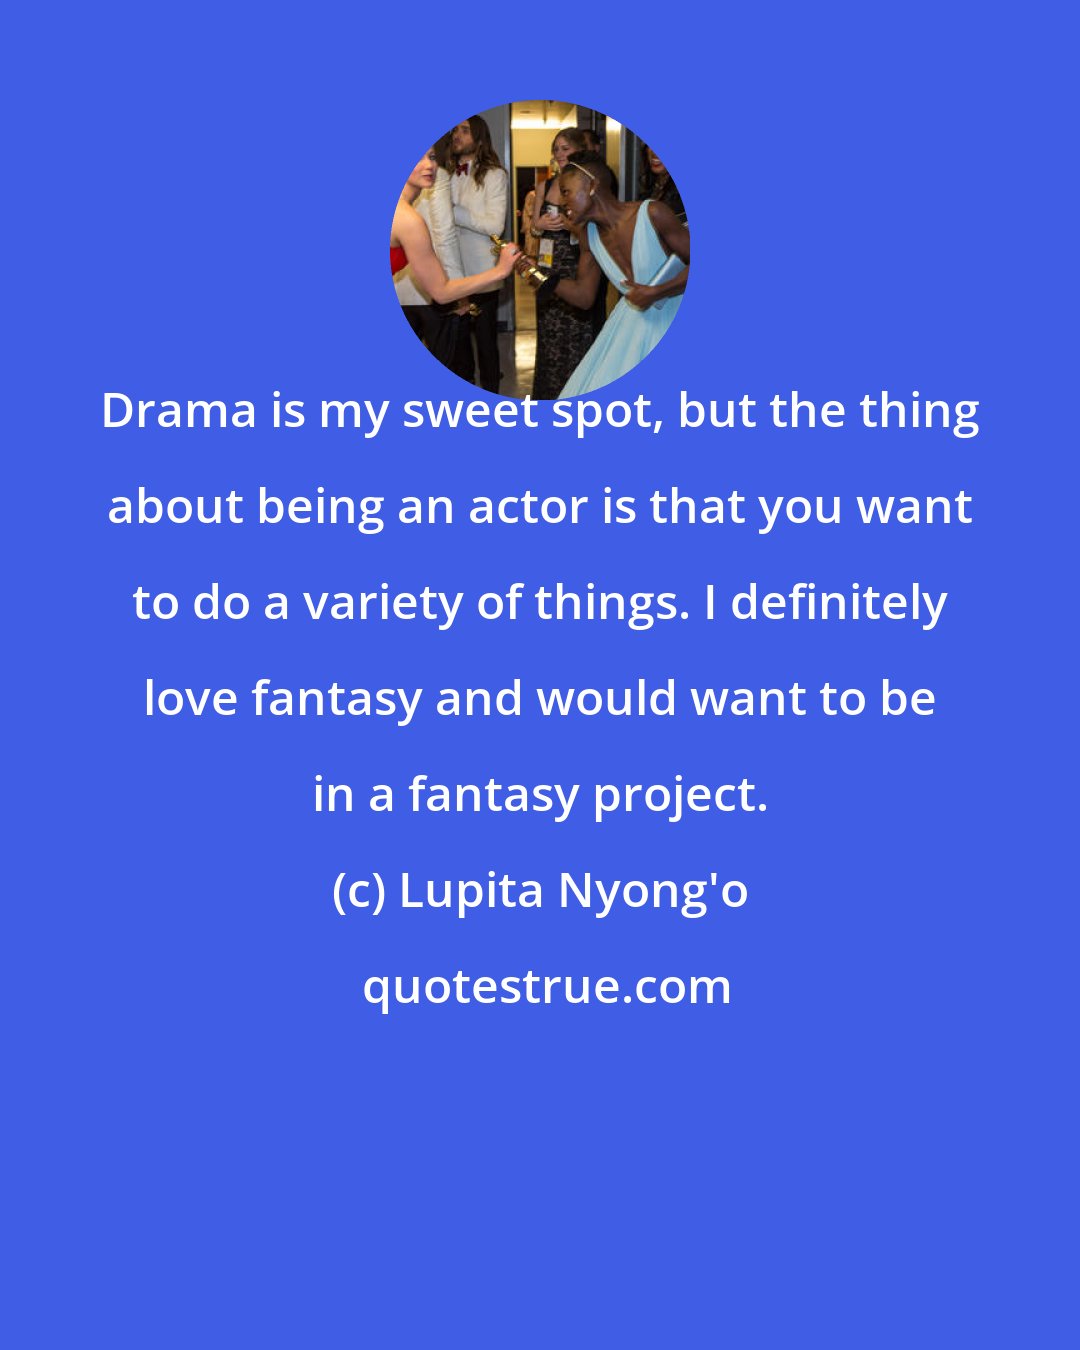 Lupita Nyong'o: Drama is my sweet spot, but the thing about being an actor is that you want to do a variety of things. I definitely love fantasy and would want to be in a fantasy project.